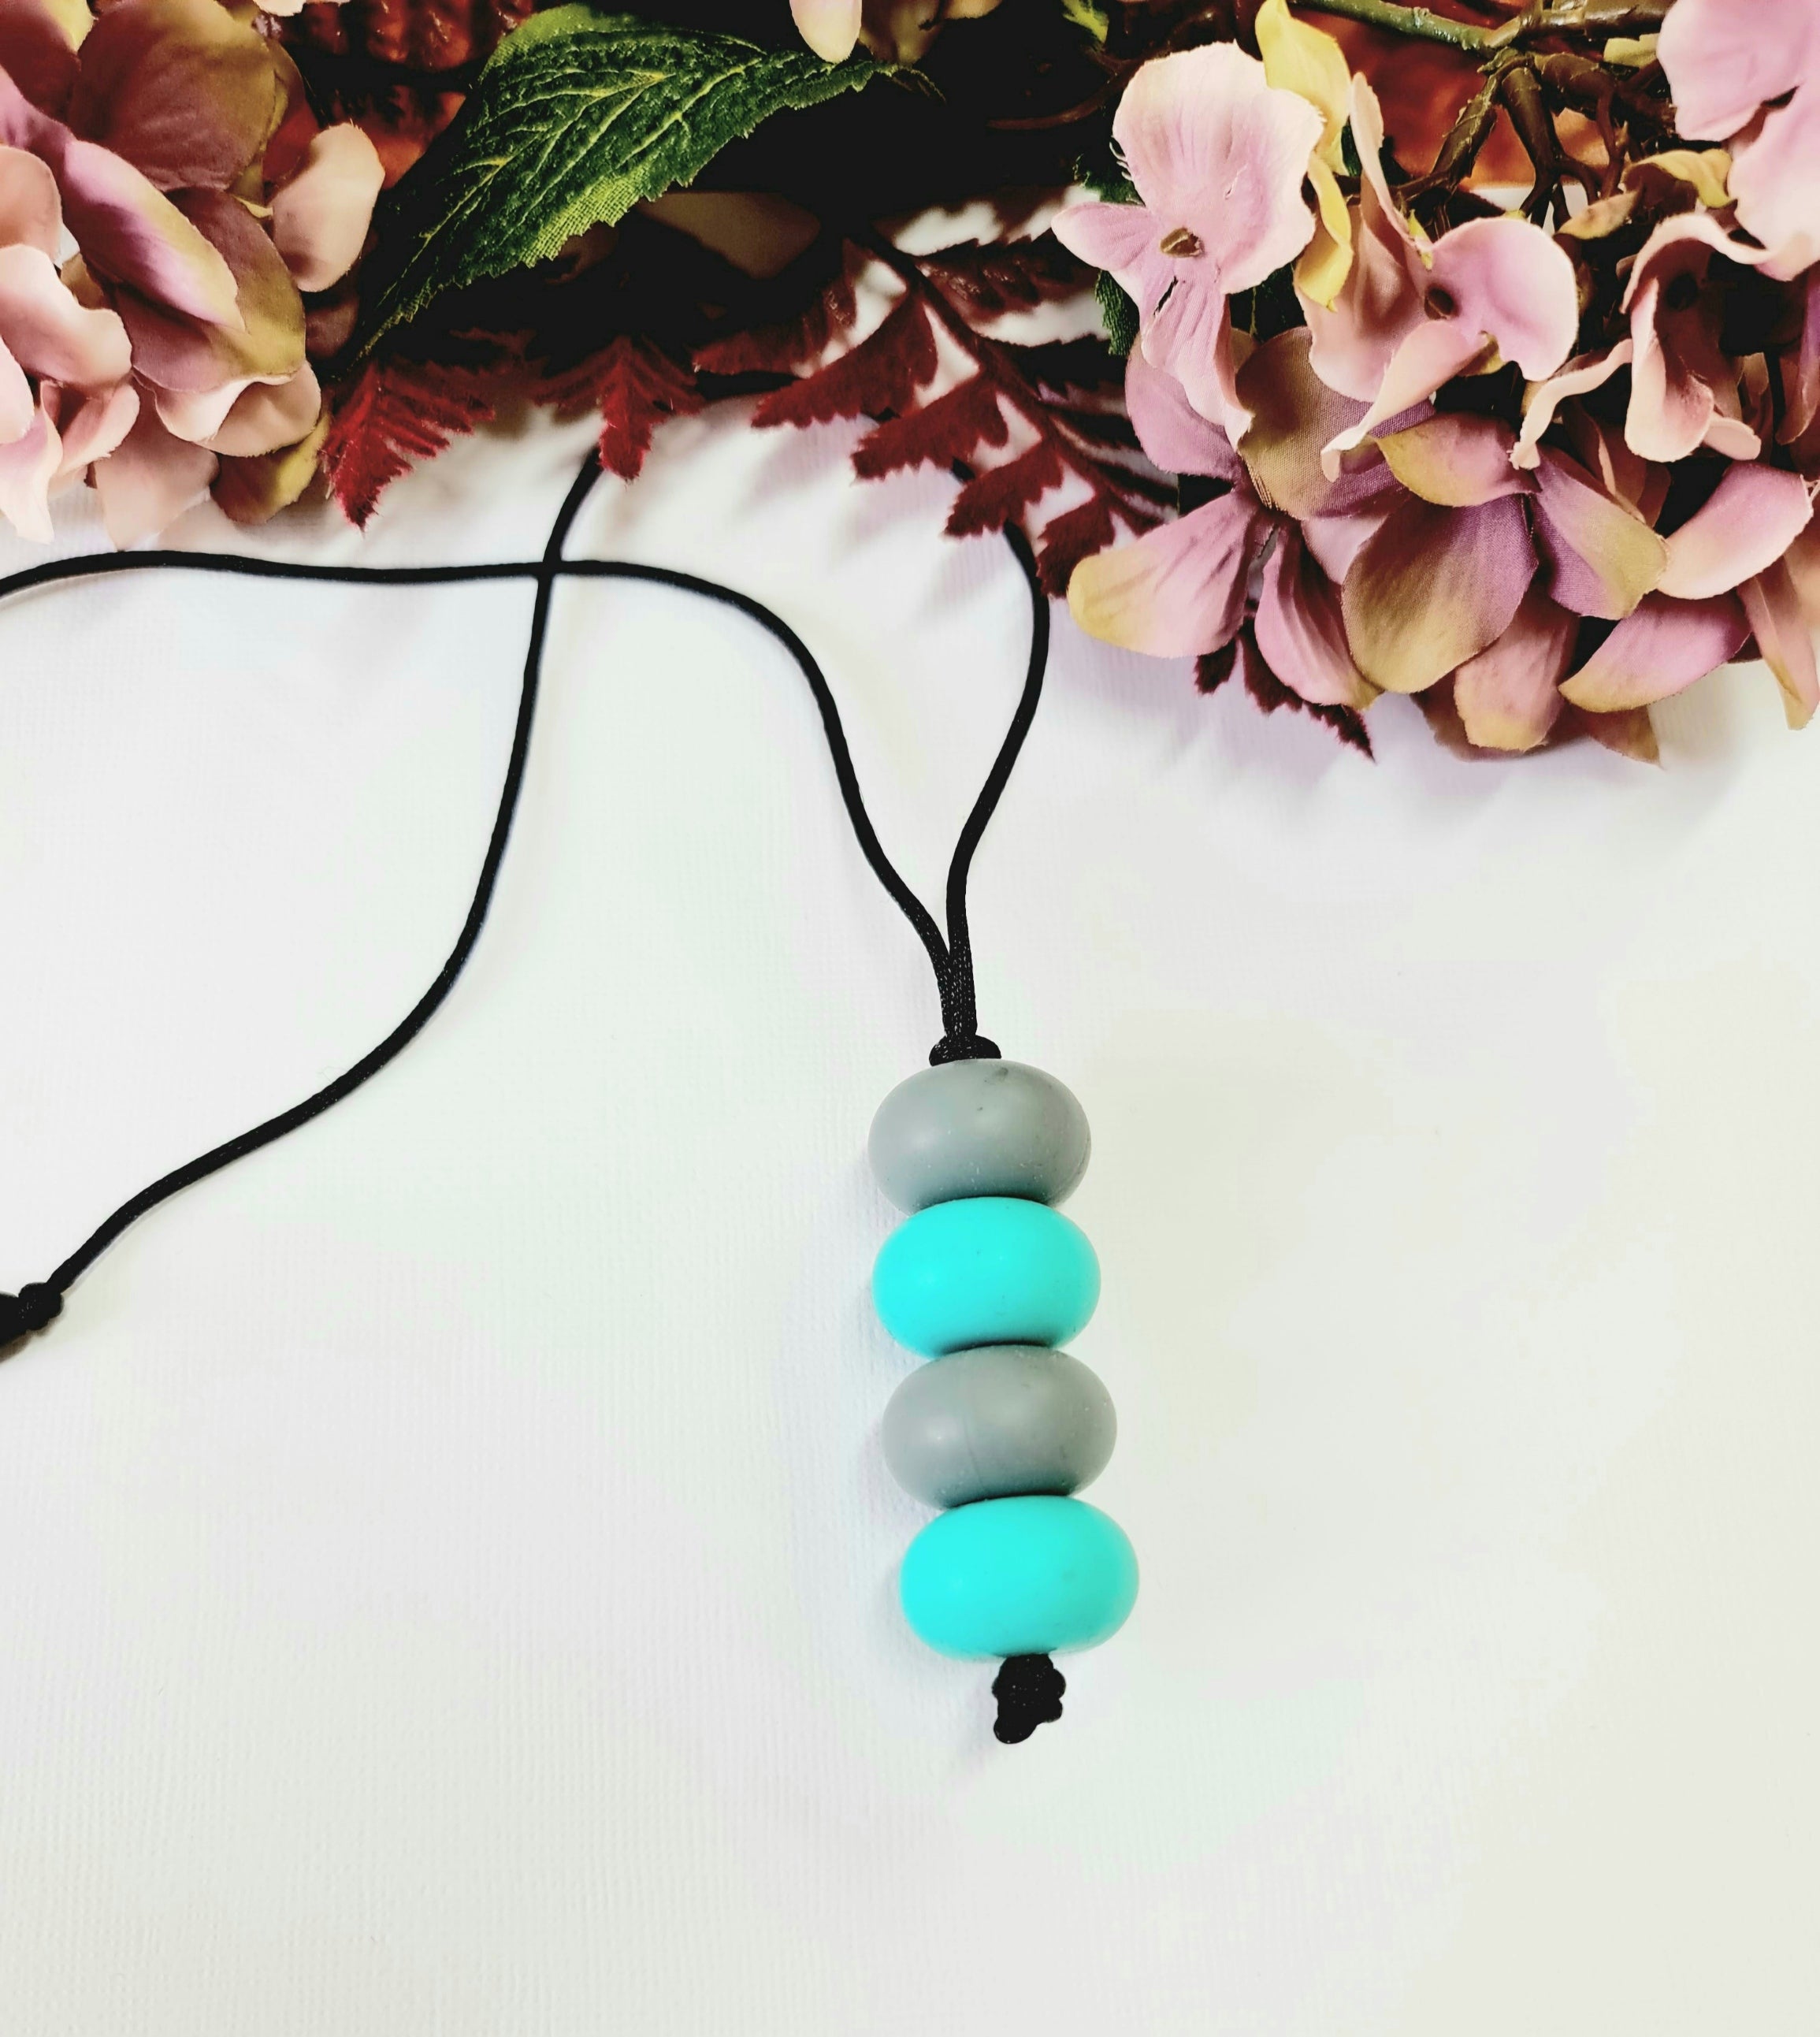 Turquoise and Grey Silicone Necklace